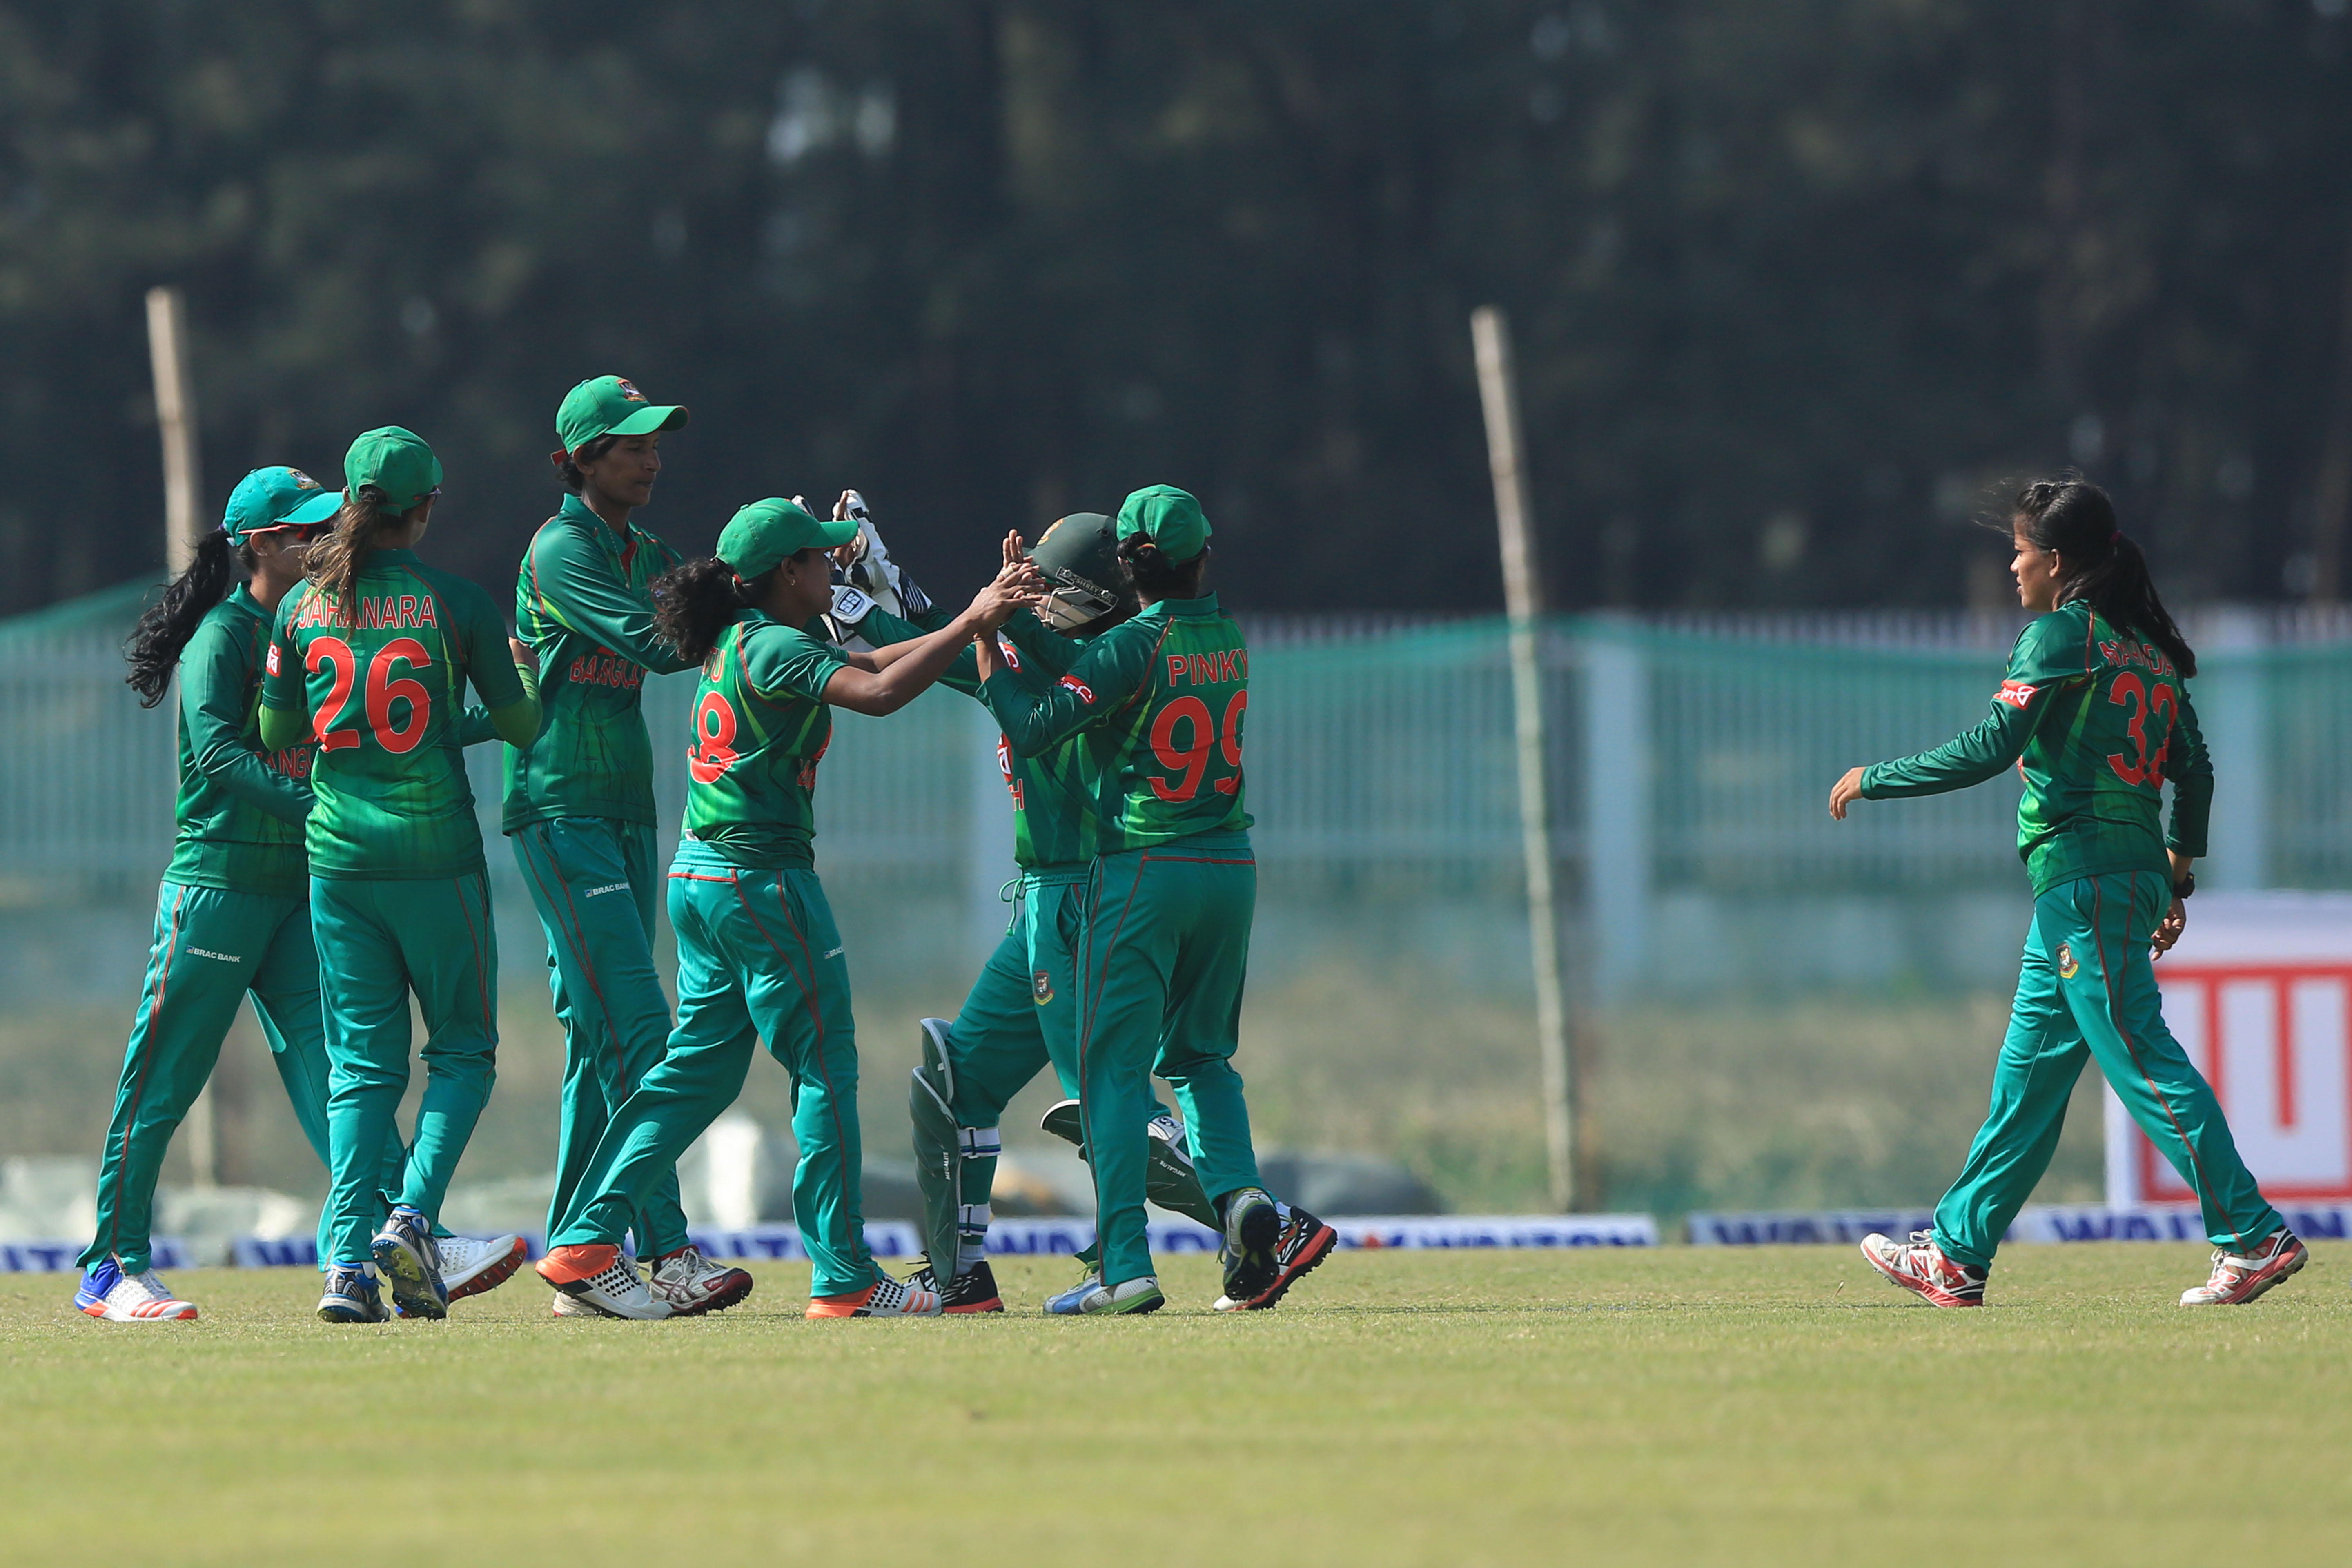 Bangladesh women lost their second game in WC qualifiers